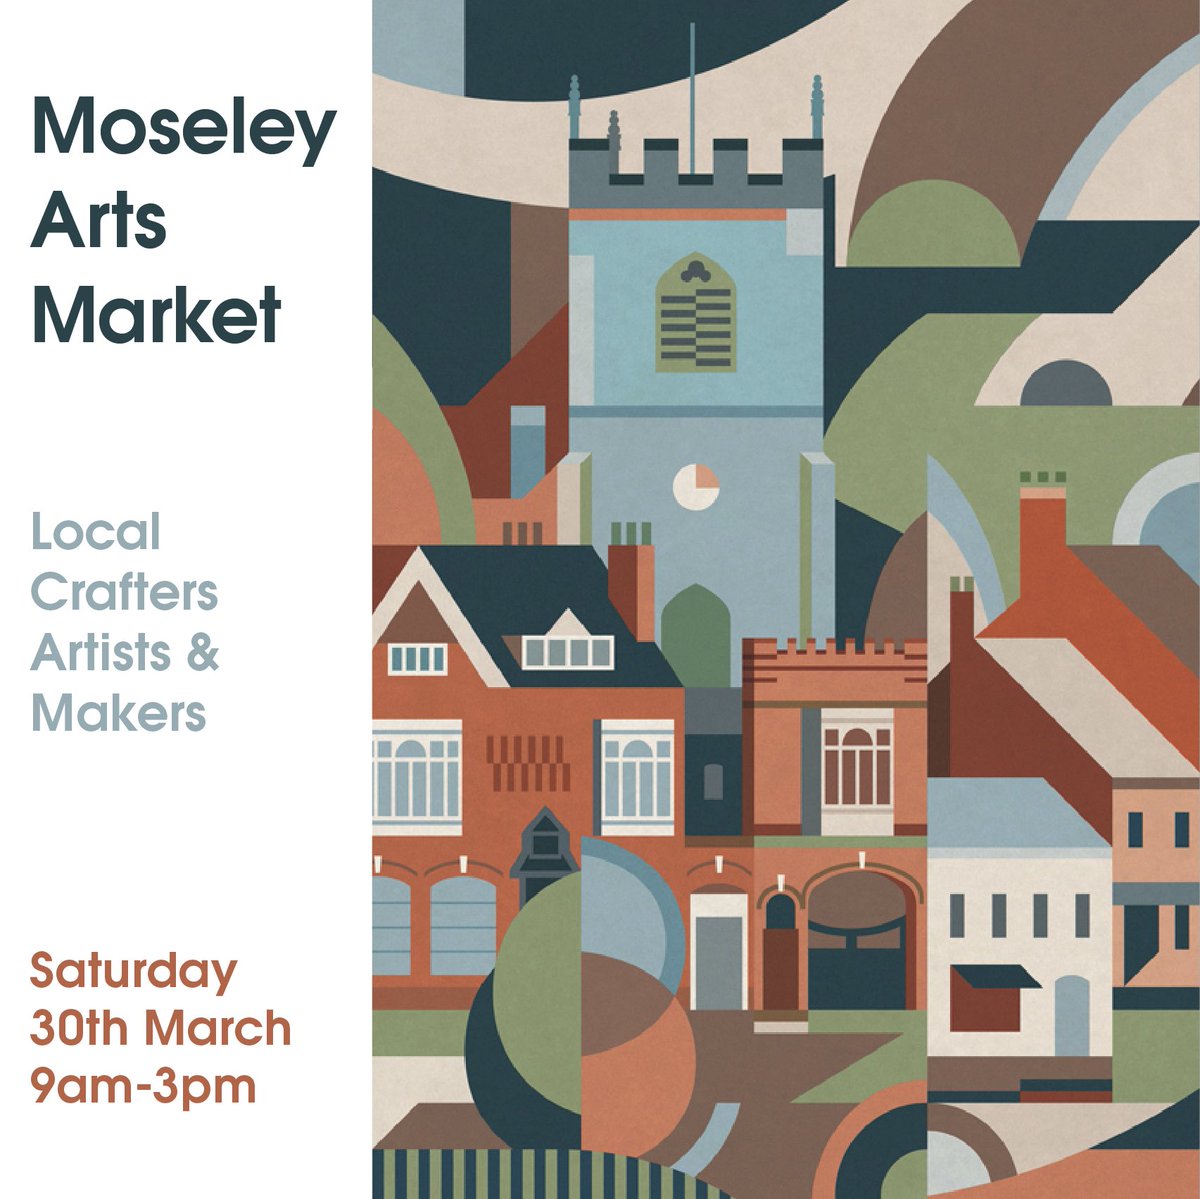 THIS SATURDAY! Birmingham’s longest running arts market is back at Moseley 9-3pm. Pop along and see my stall 👀 #art #brum #craft